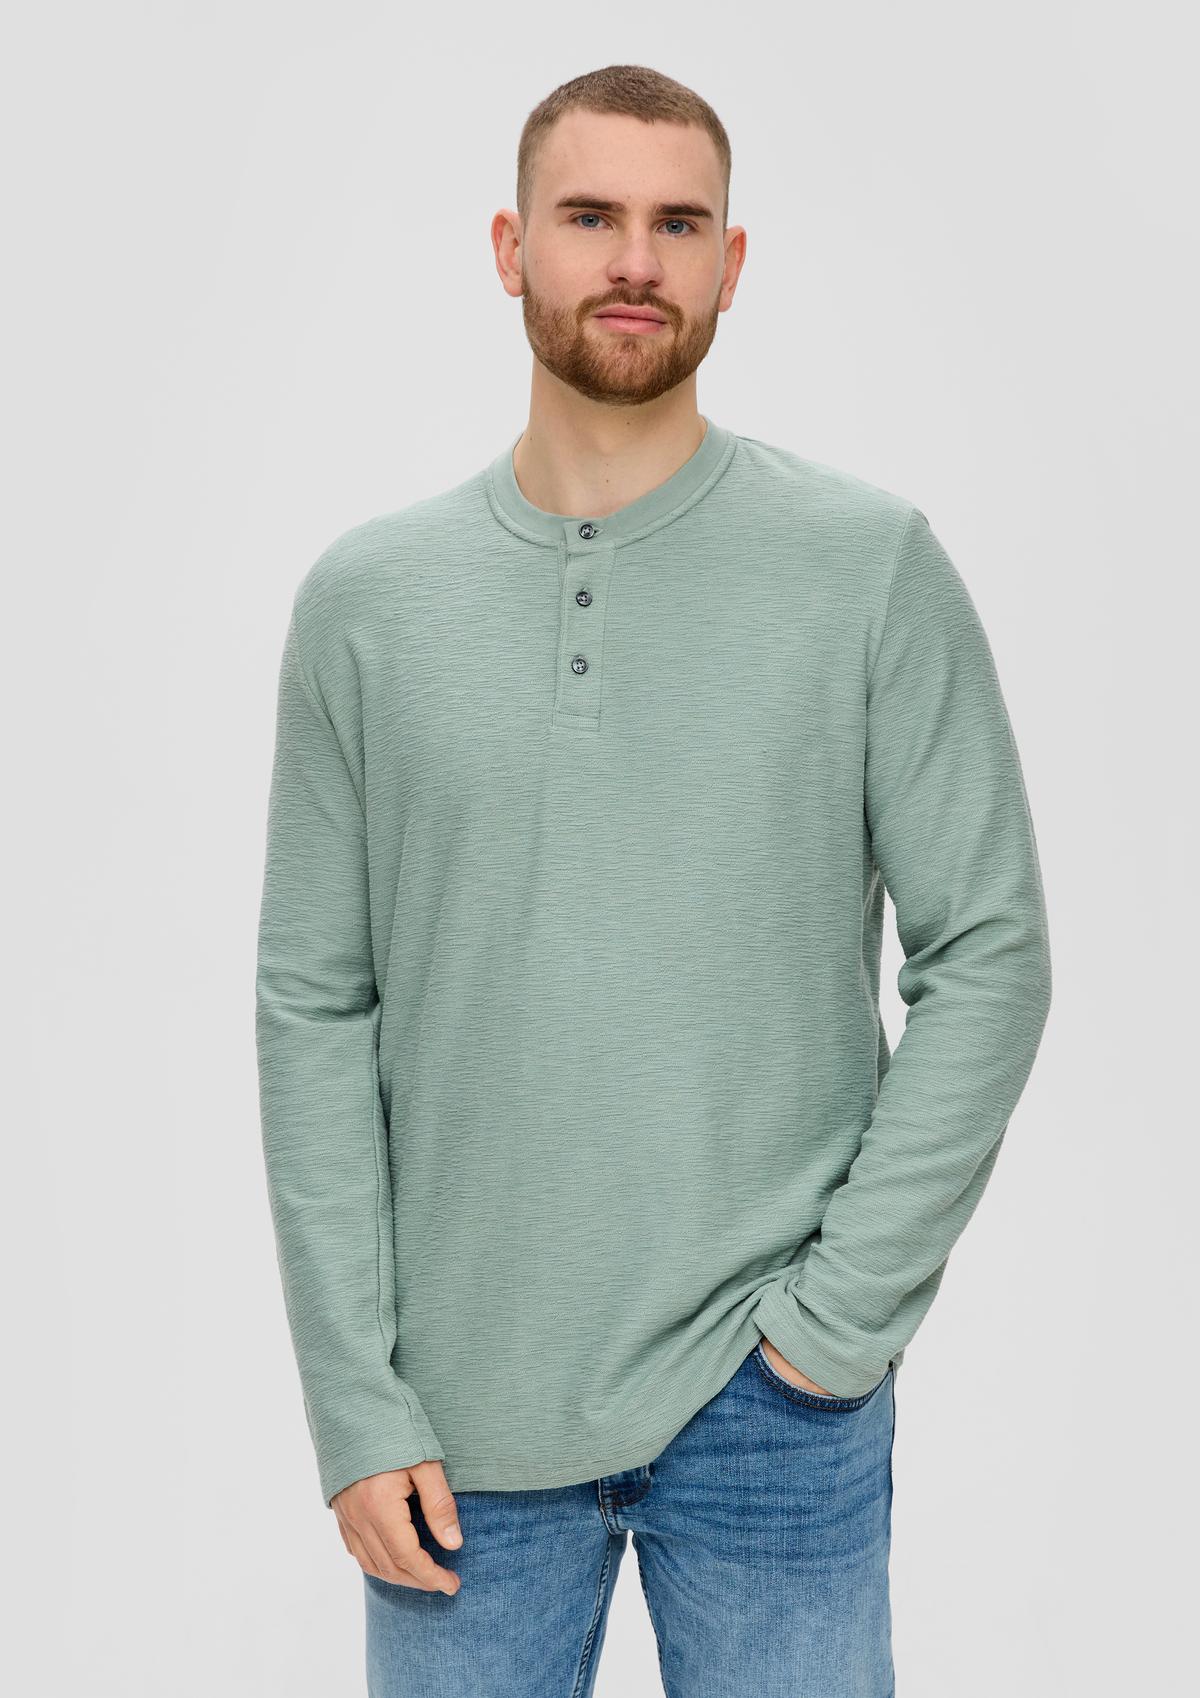 Long sleeve top with - a hem sage rolled green